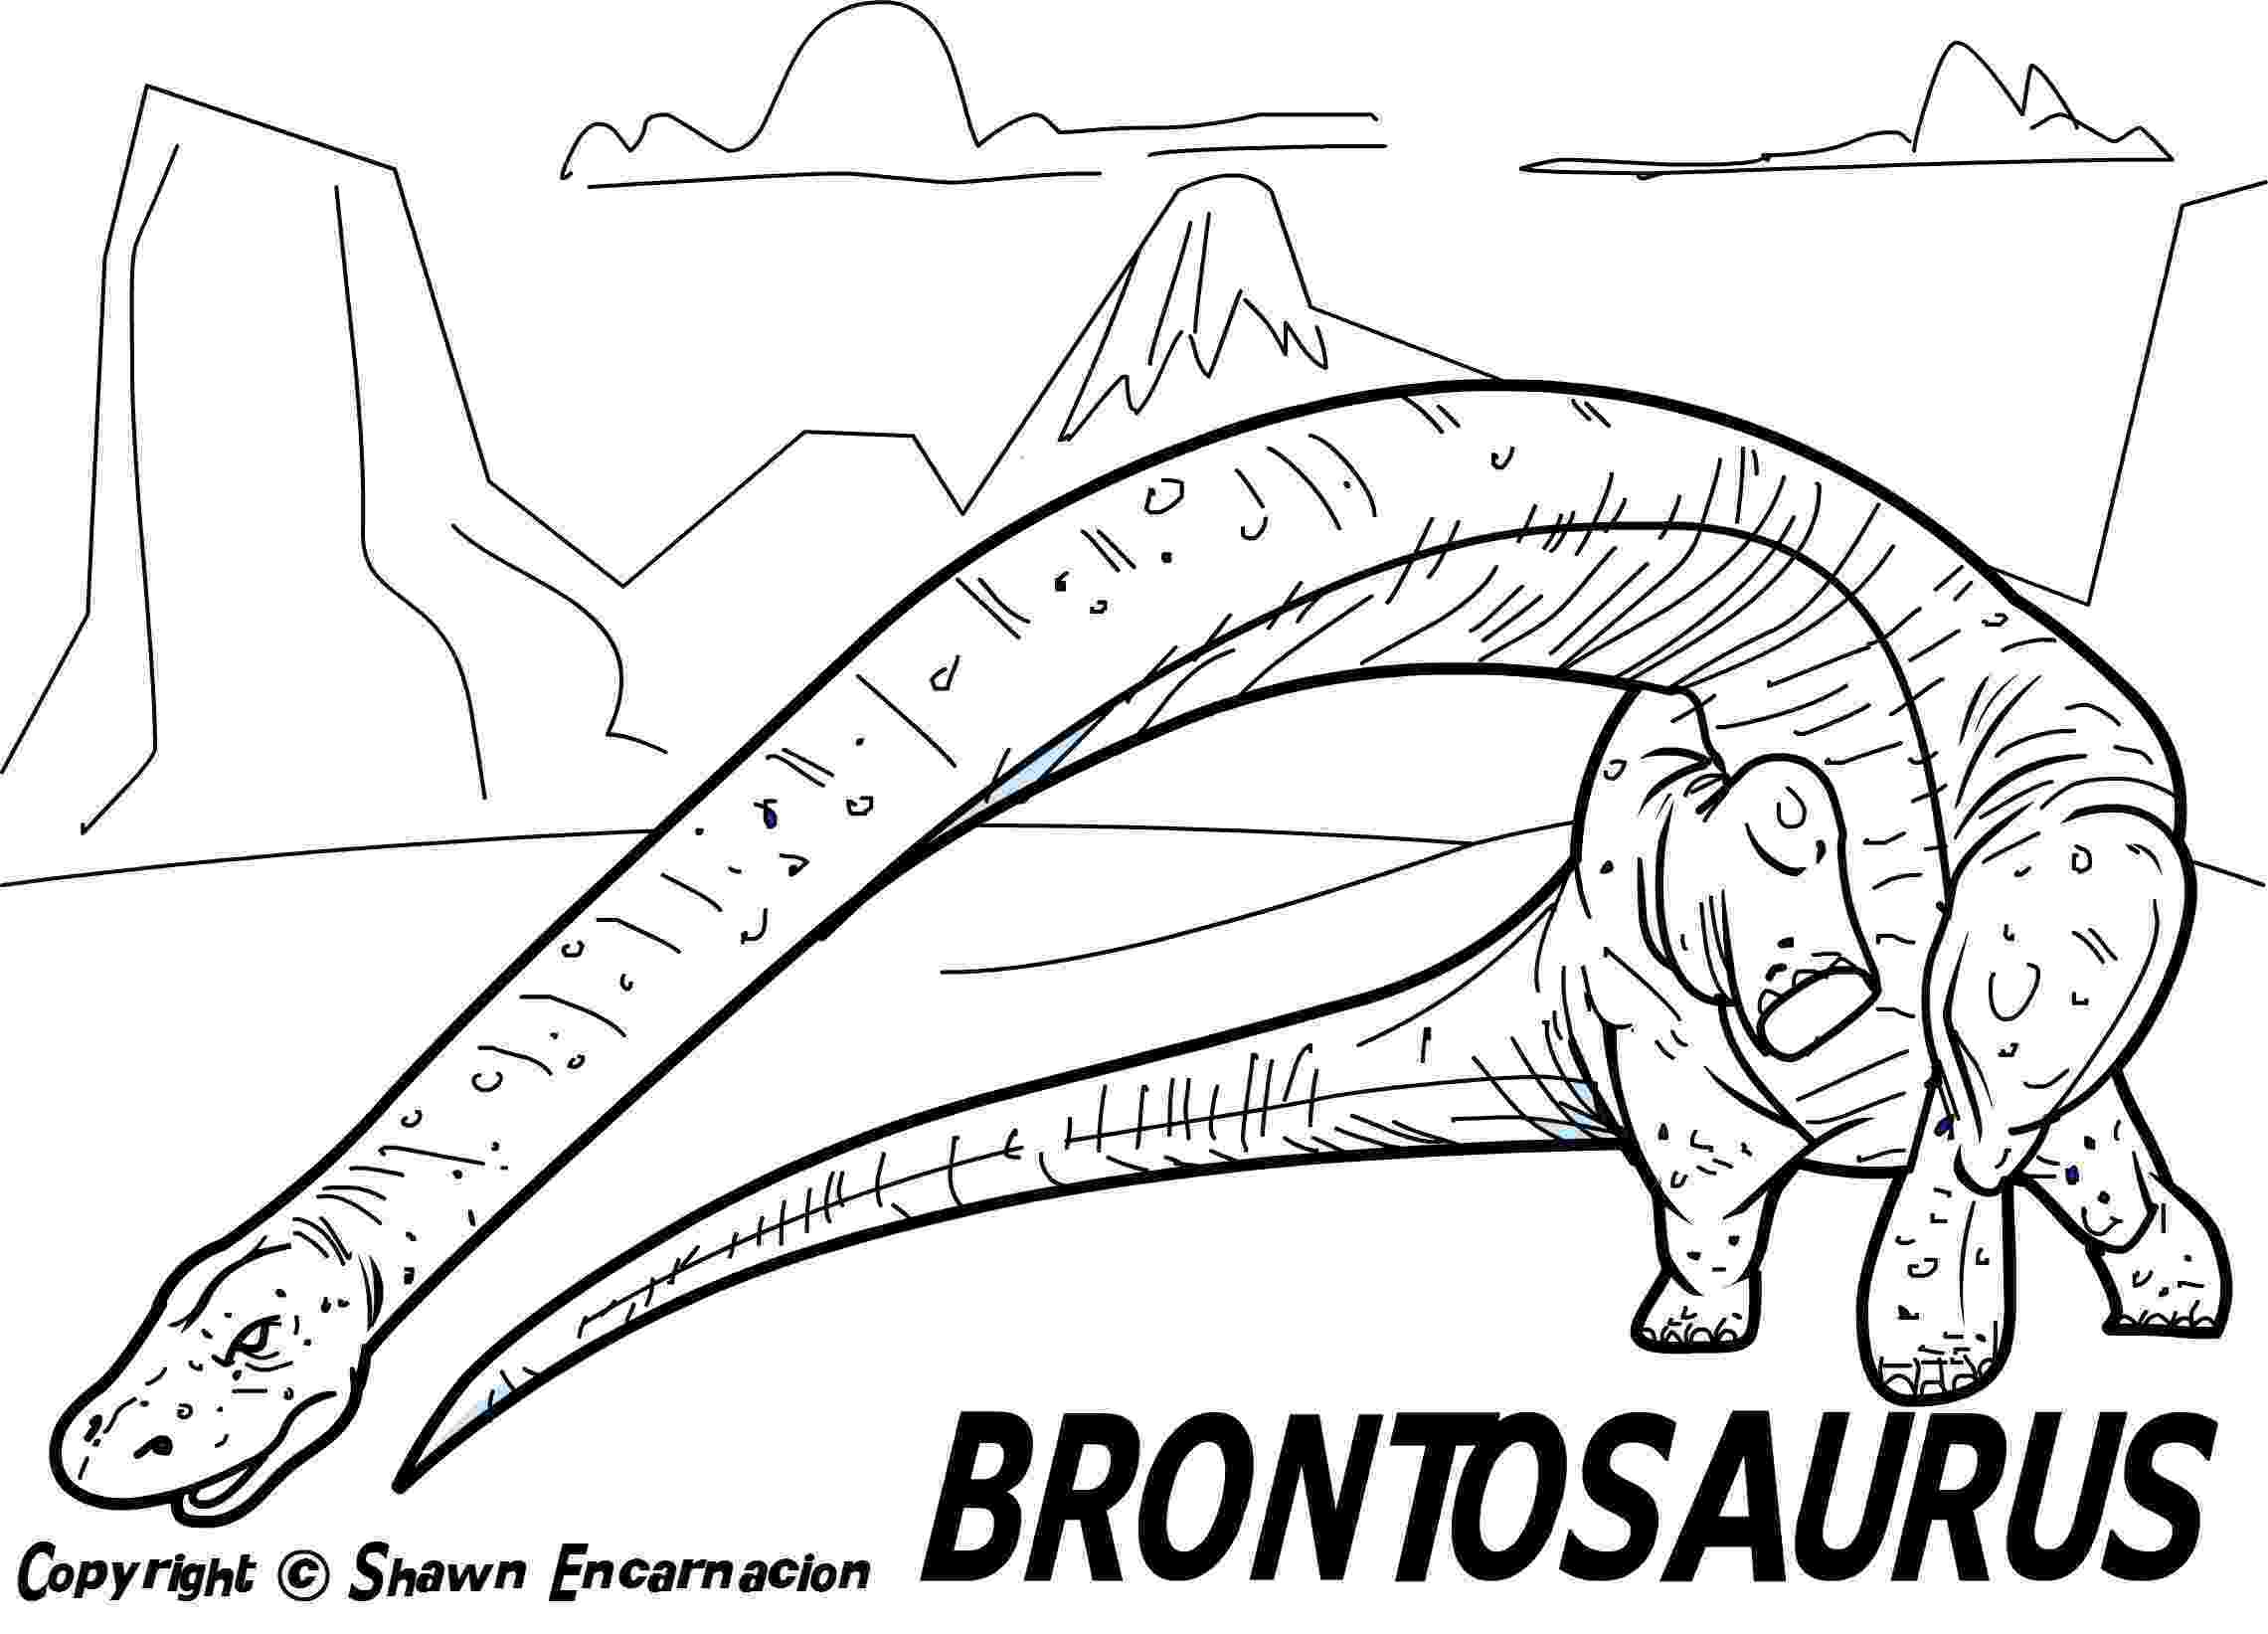 dinosaur colouring page dinosaur coloring pages to download and print for free colouring page dinosaur 